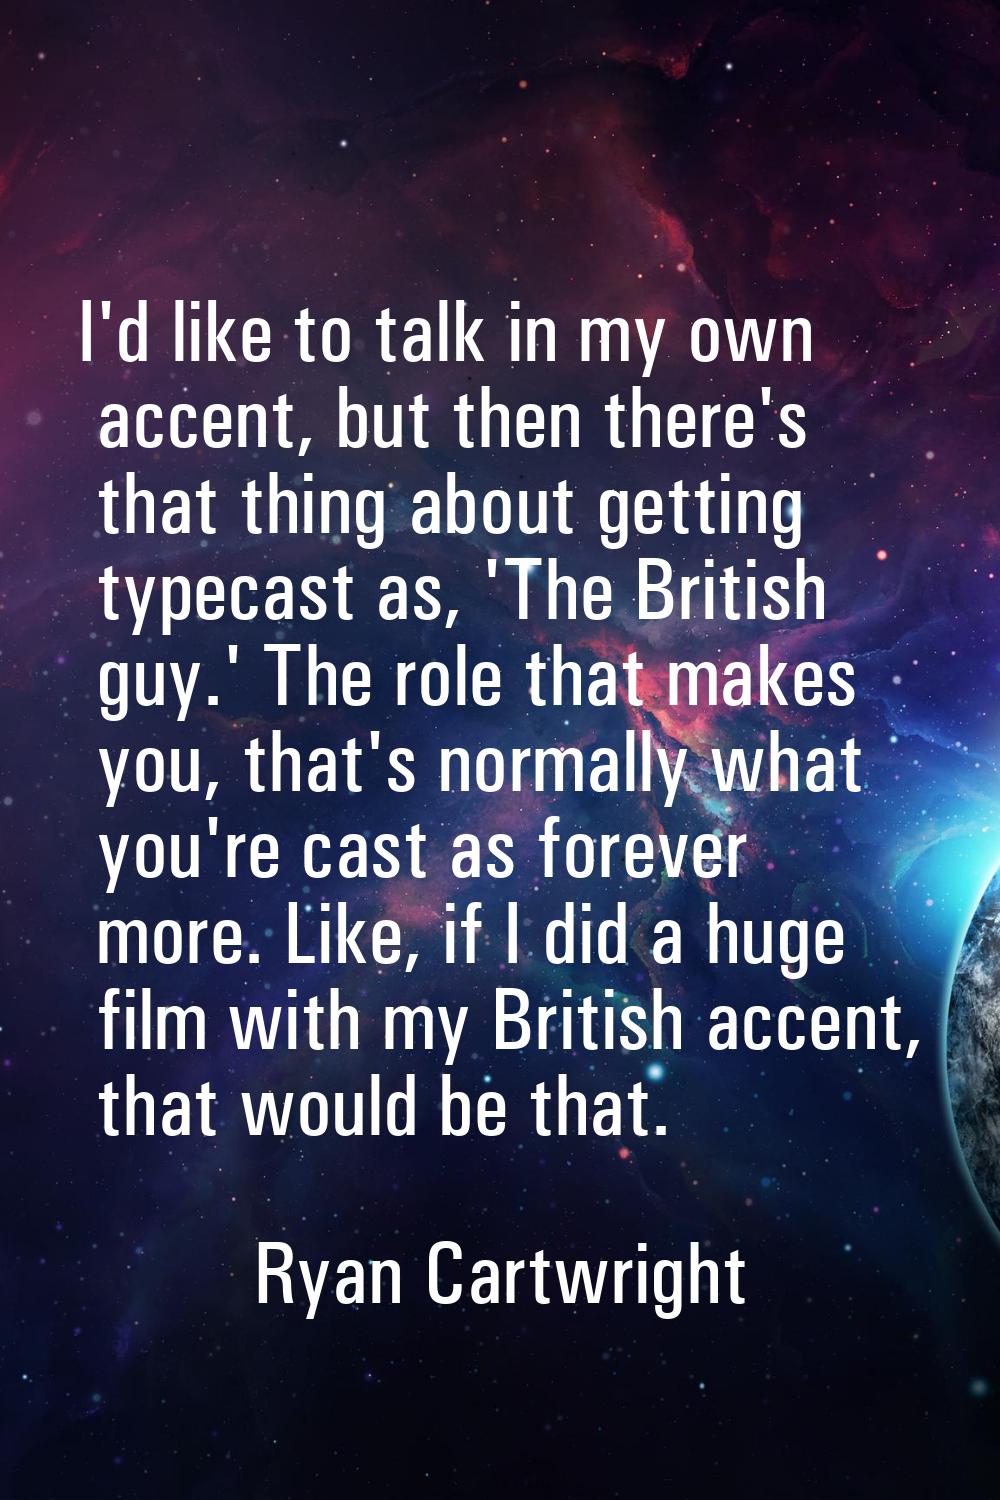 I'd like to talk in my own accent, but then there's that thing about getting typecast as, 'The Brit